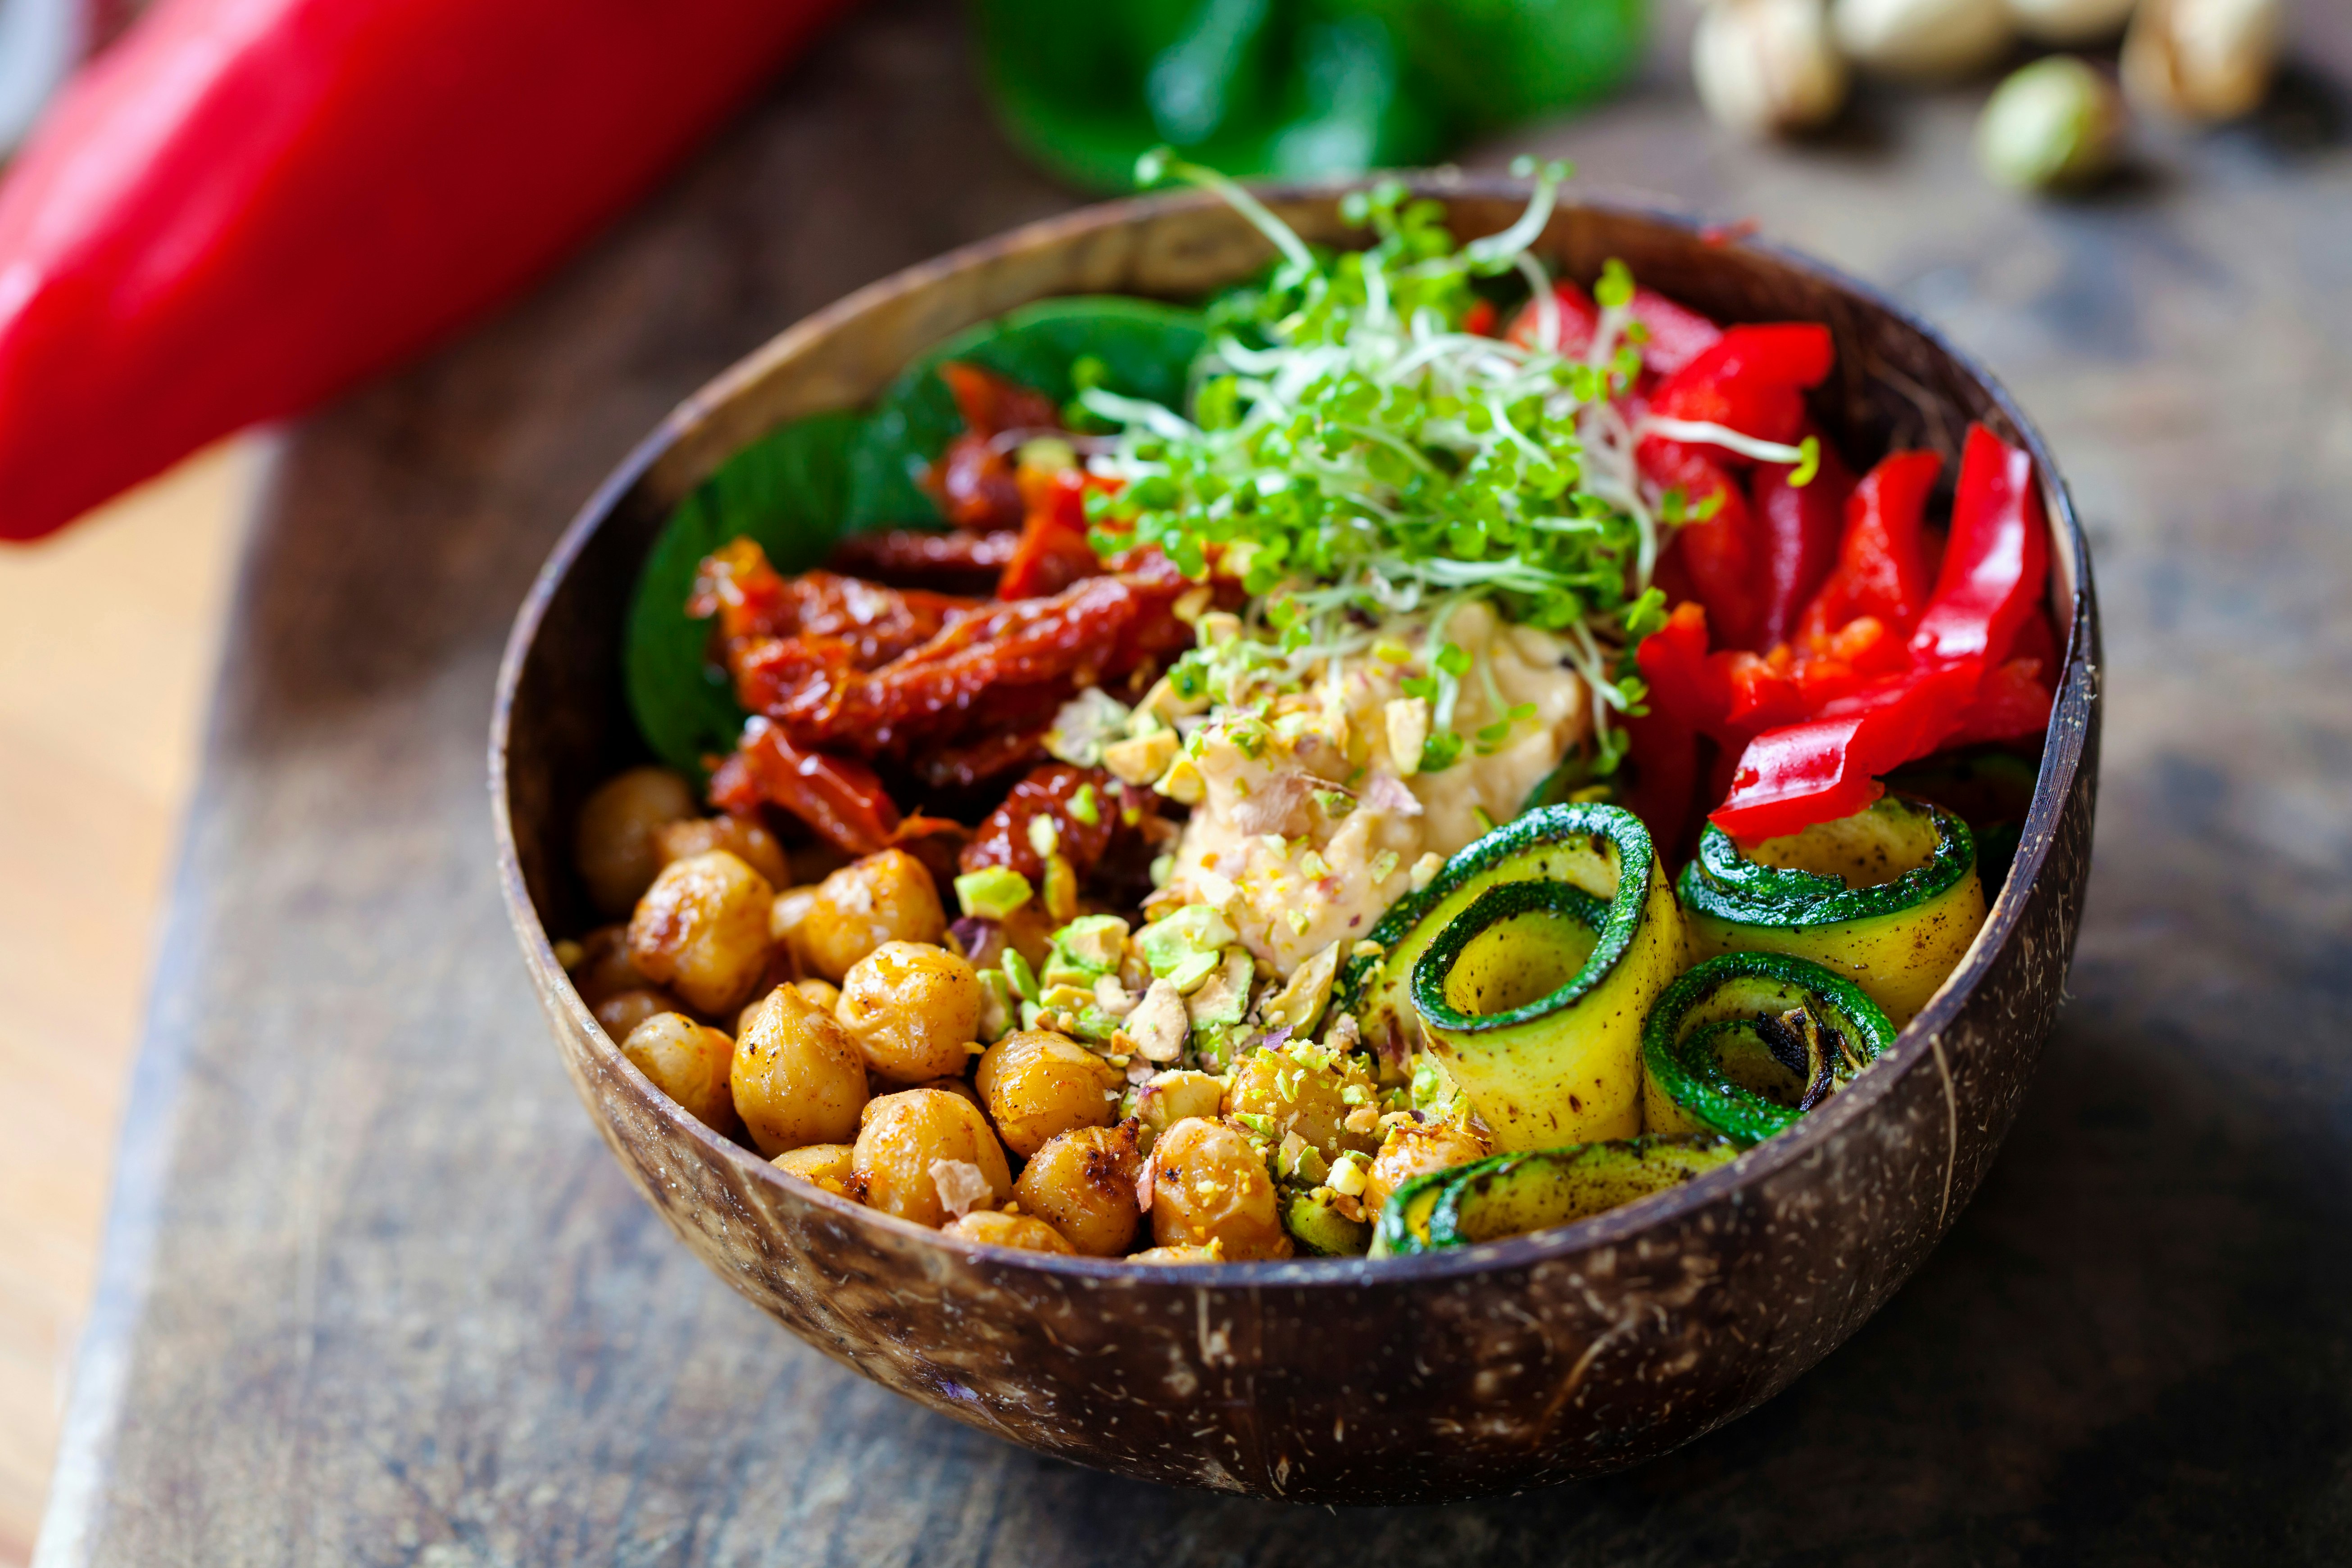 Closeup of a bowl filled with chickpeas, cucumbers, red peppers, sun-dried tomatoes and grains; 